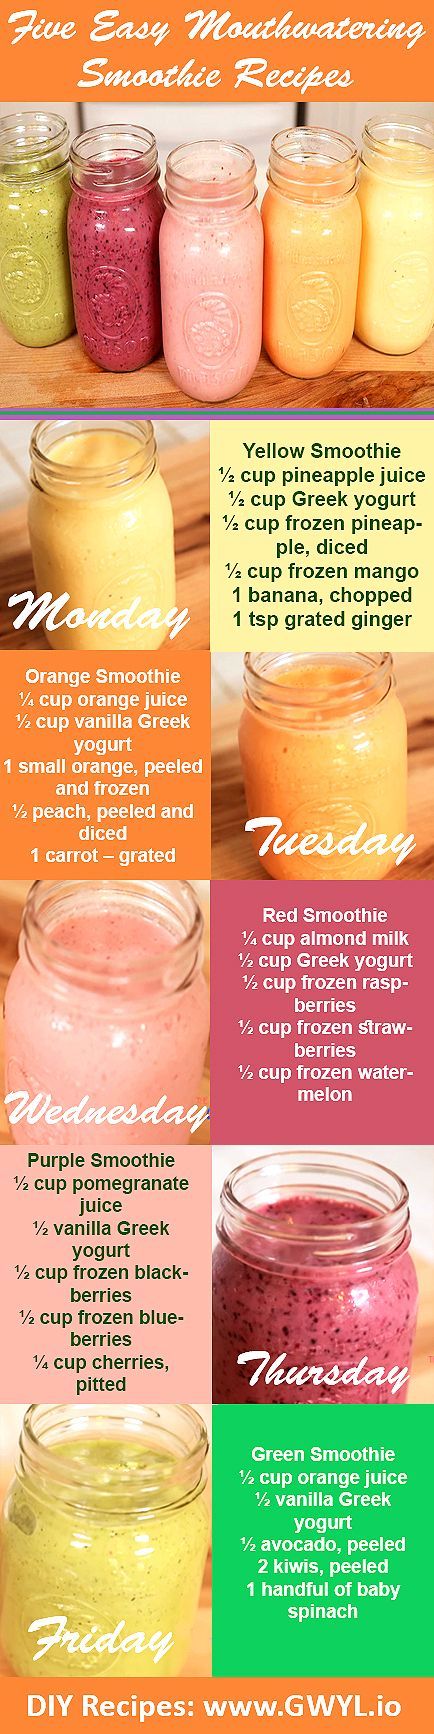 5 Healthy Smoothies For Breakfast